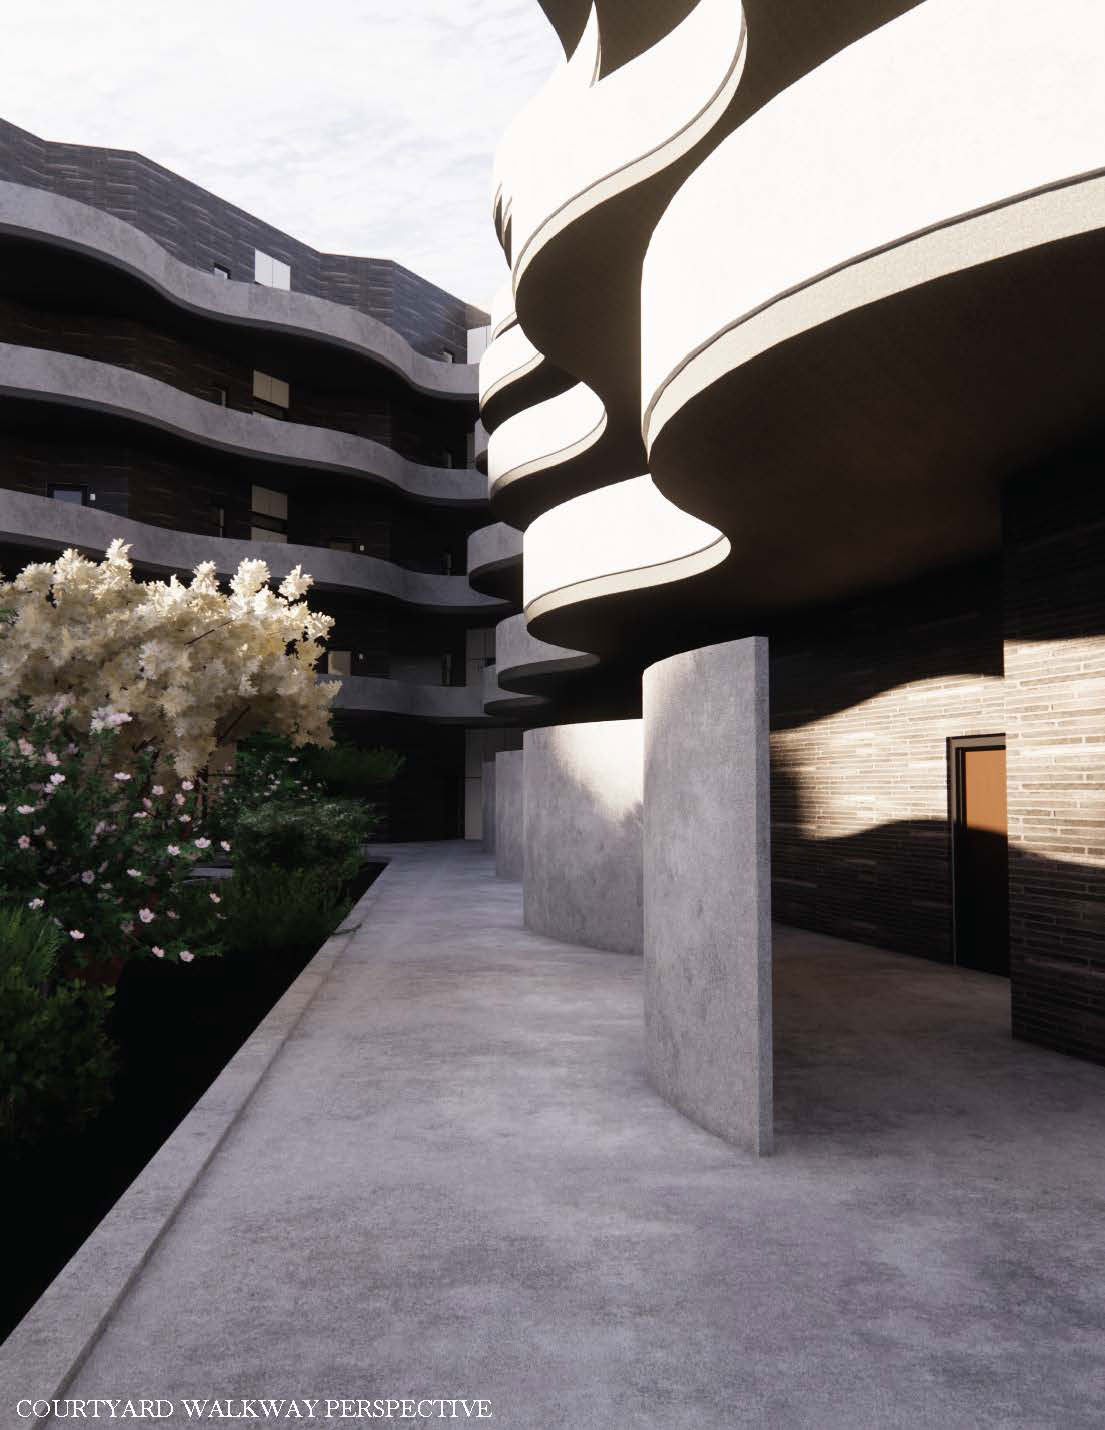 The bottom left of this phot reads &quot;courtyard walkway perspective&quot;. The building is dark gray and consists of light gray balcony railings that weave their way through the building in squiggle shapes. The bottom ground has trees and grassy area.